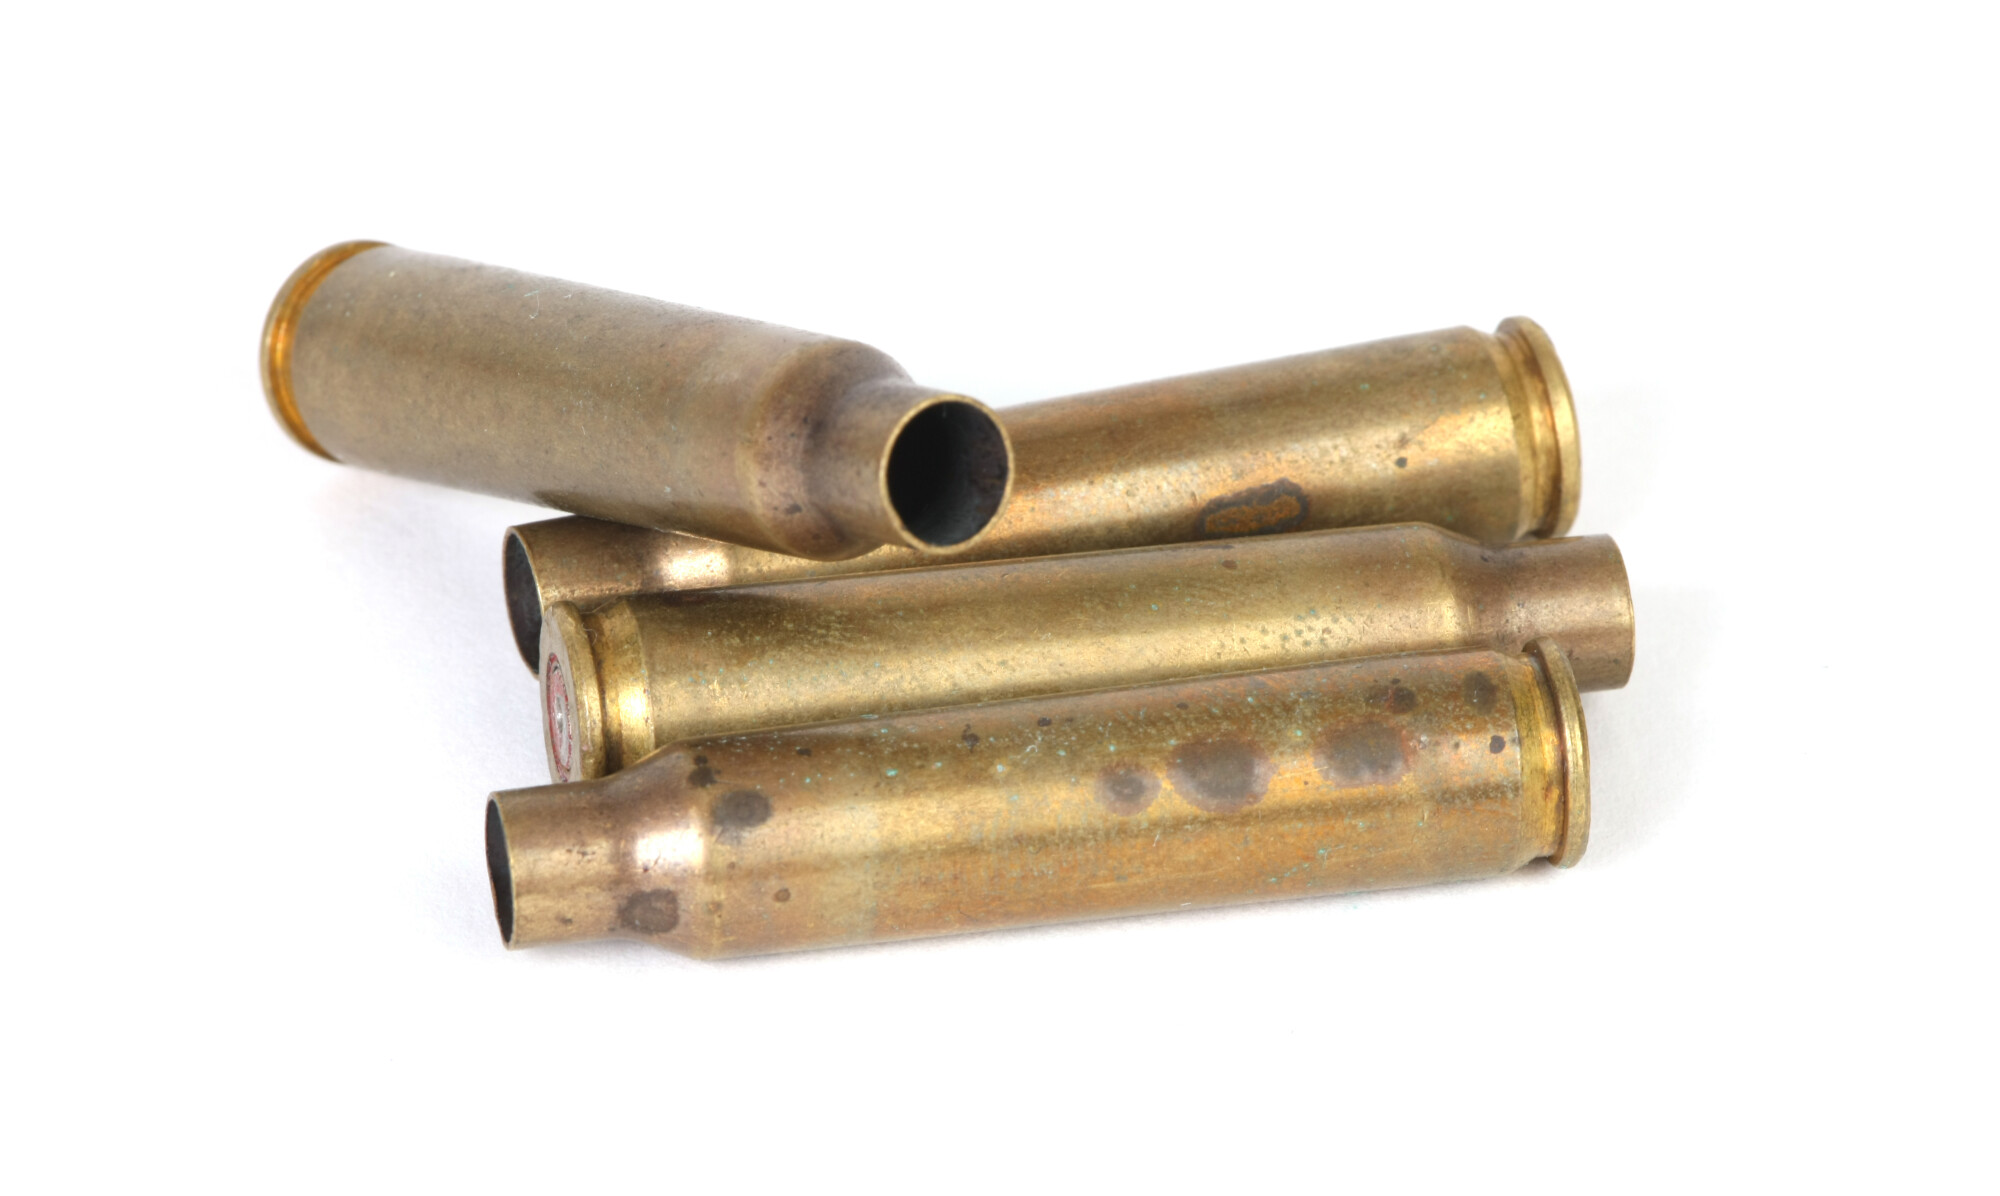 Once-Fired Brass - 9mm, Cartridge Cases, Shooting Stuff